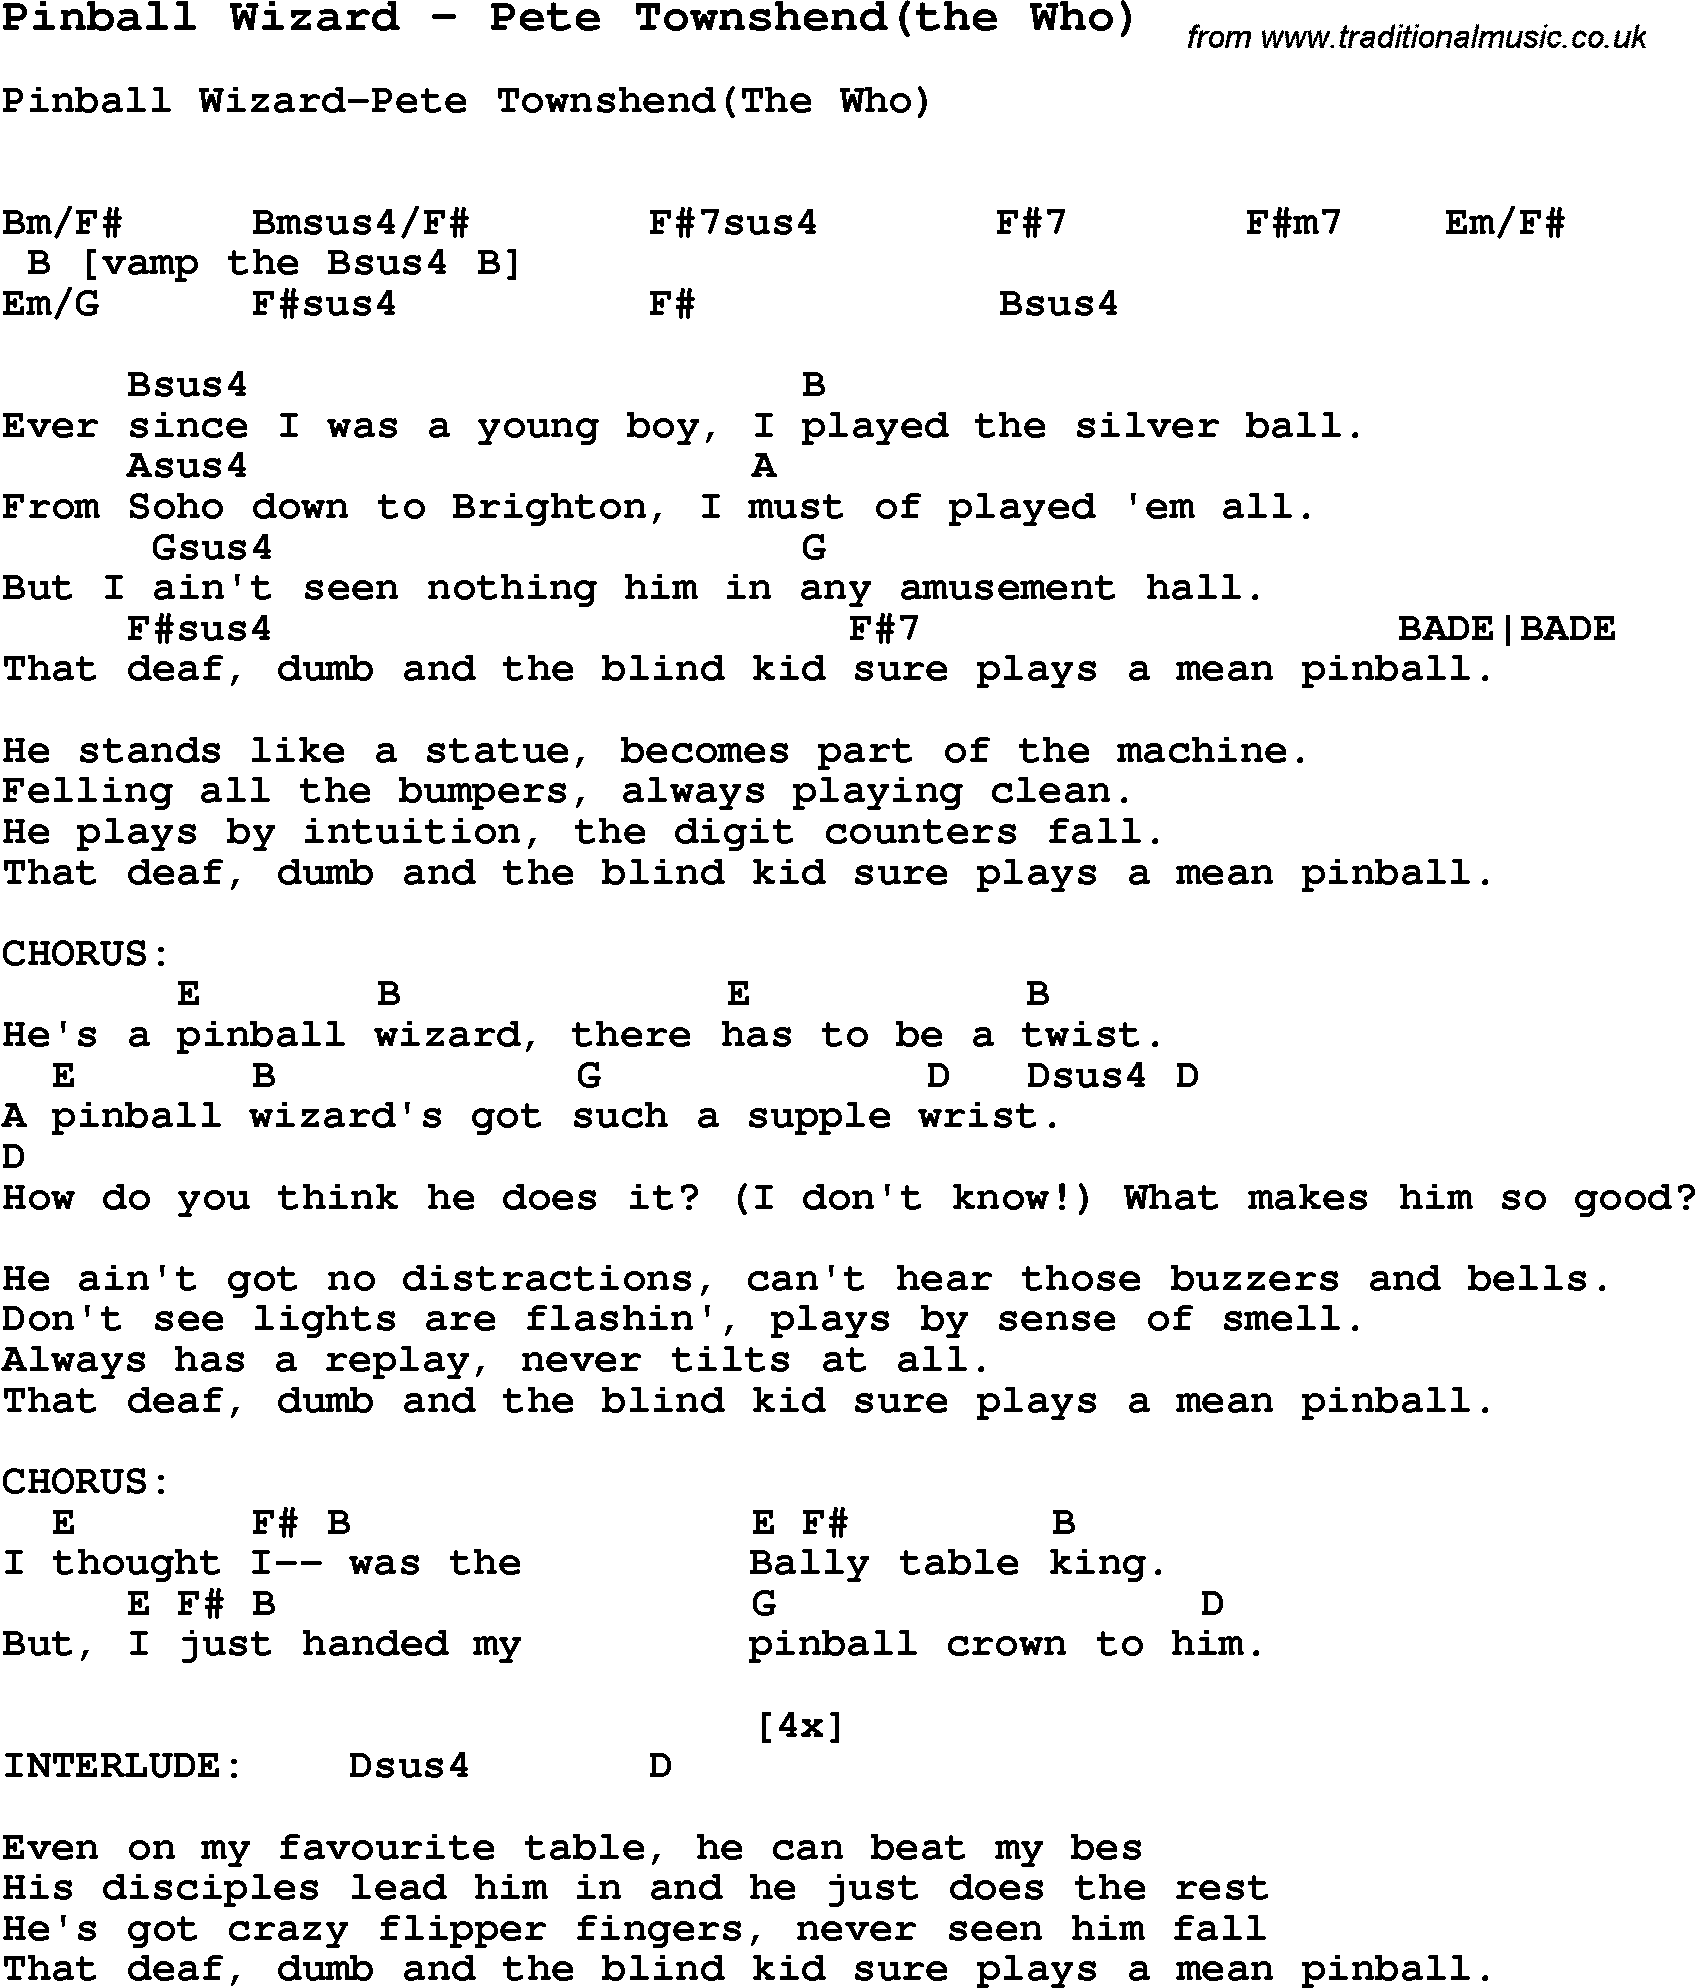 Song Pinball Wizard by Pete Townshend(the Who), with lyrics for vocal performance and accompaniment chords for Ukulele, Guitar Banjo etc.